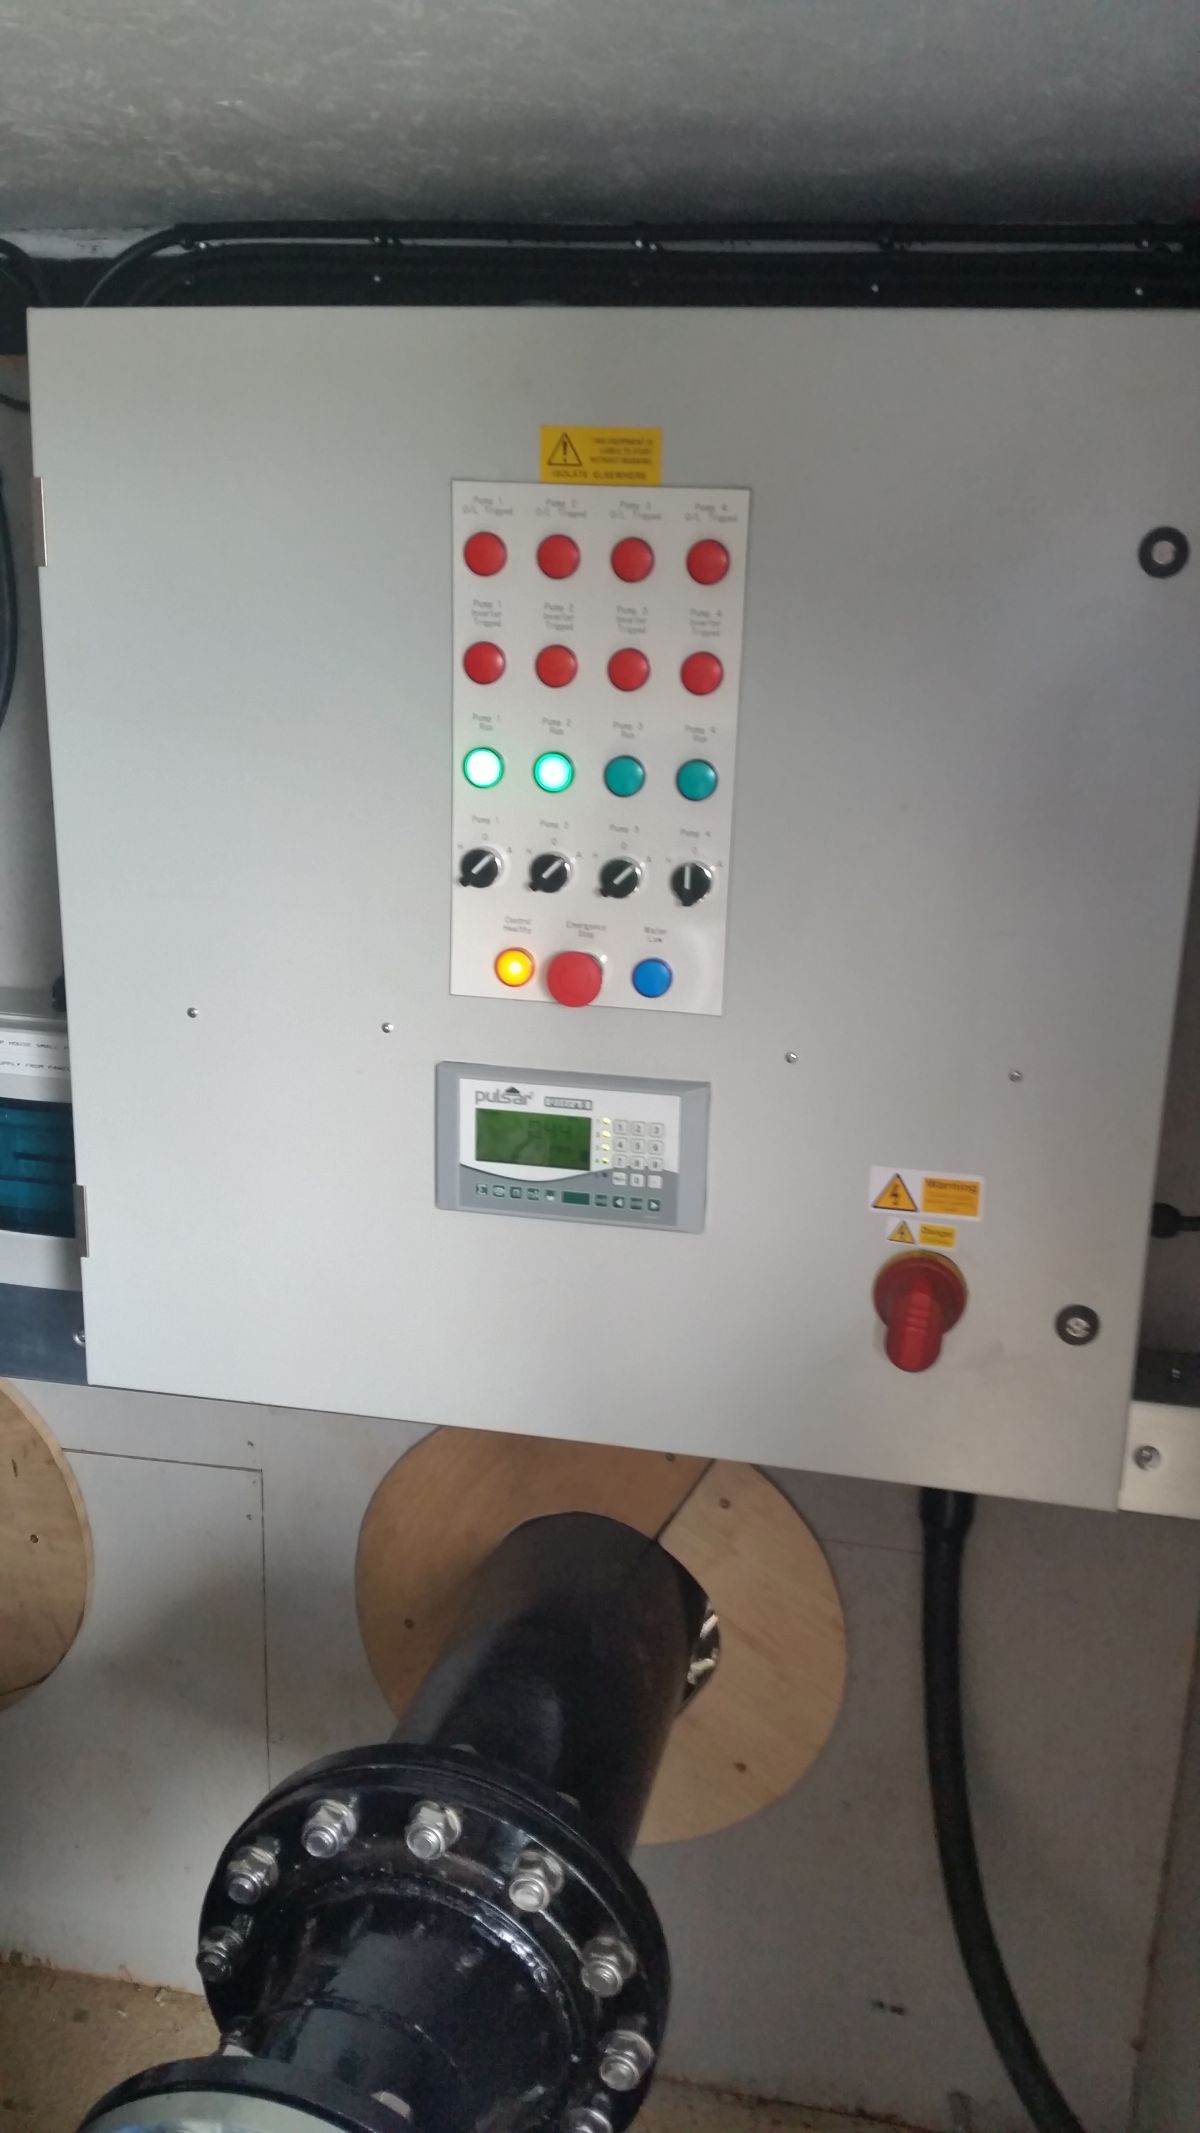 ETA Control Systems Ltd Commercial Electrical Installations Electrical work for Marinas, farms, farm buildings, factories, large industrial units & marinas Oxfordshire. Agricultural electrical engineers Pig farm